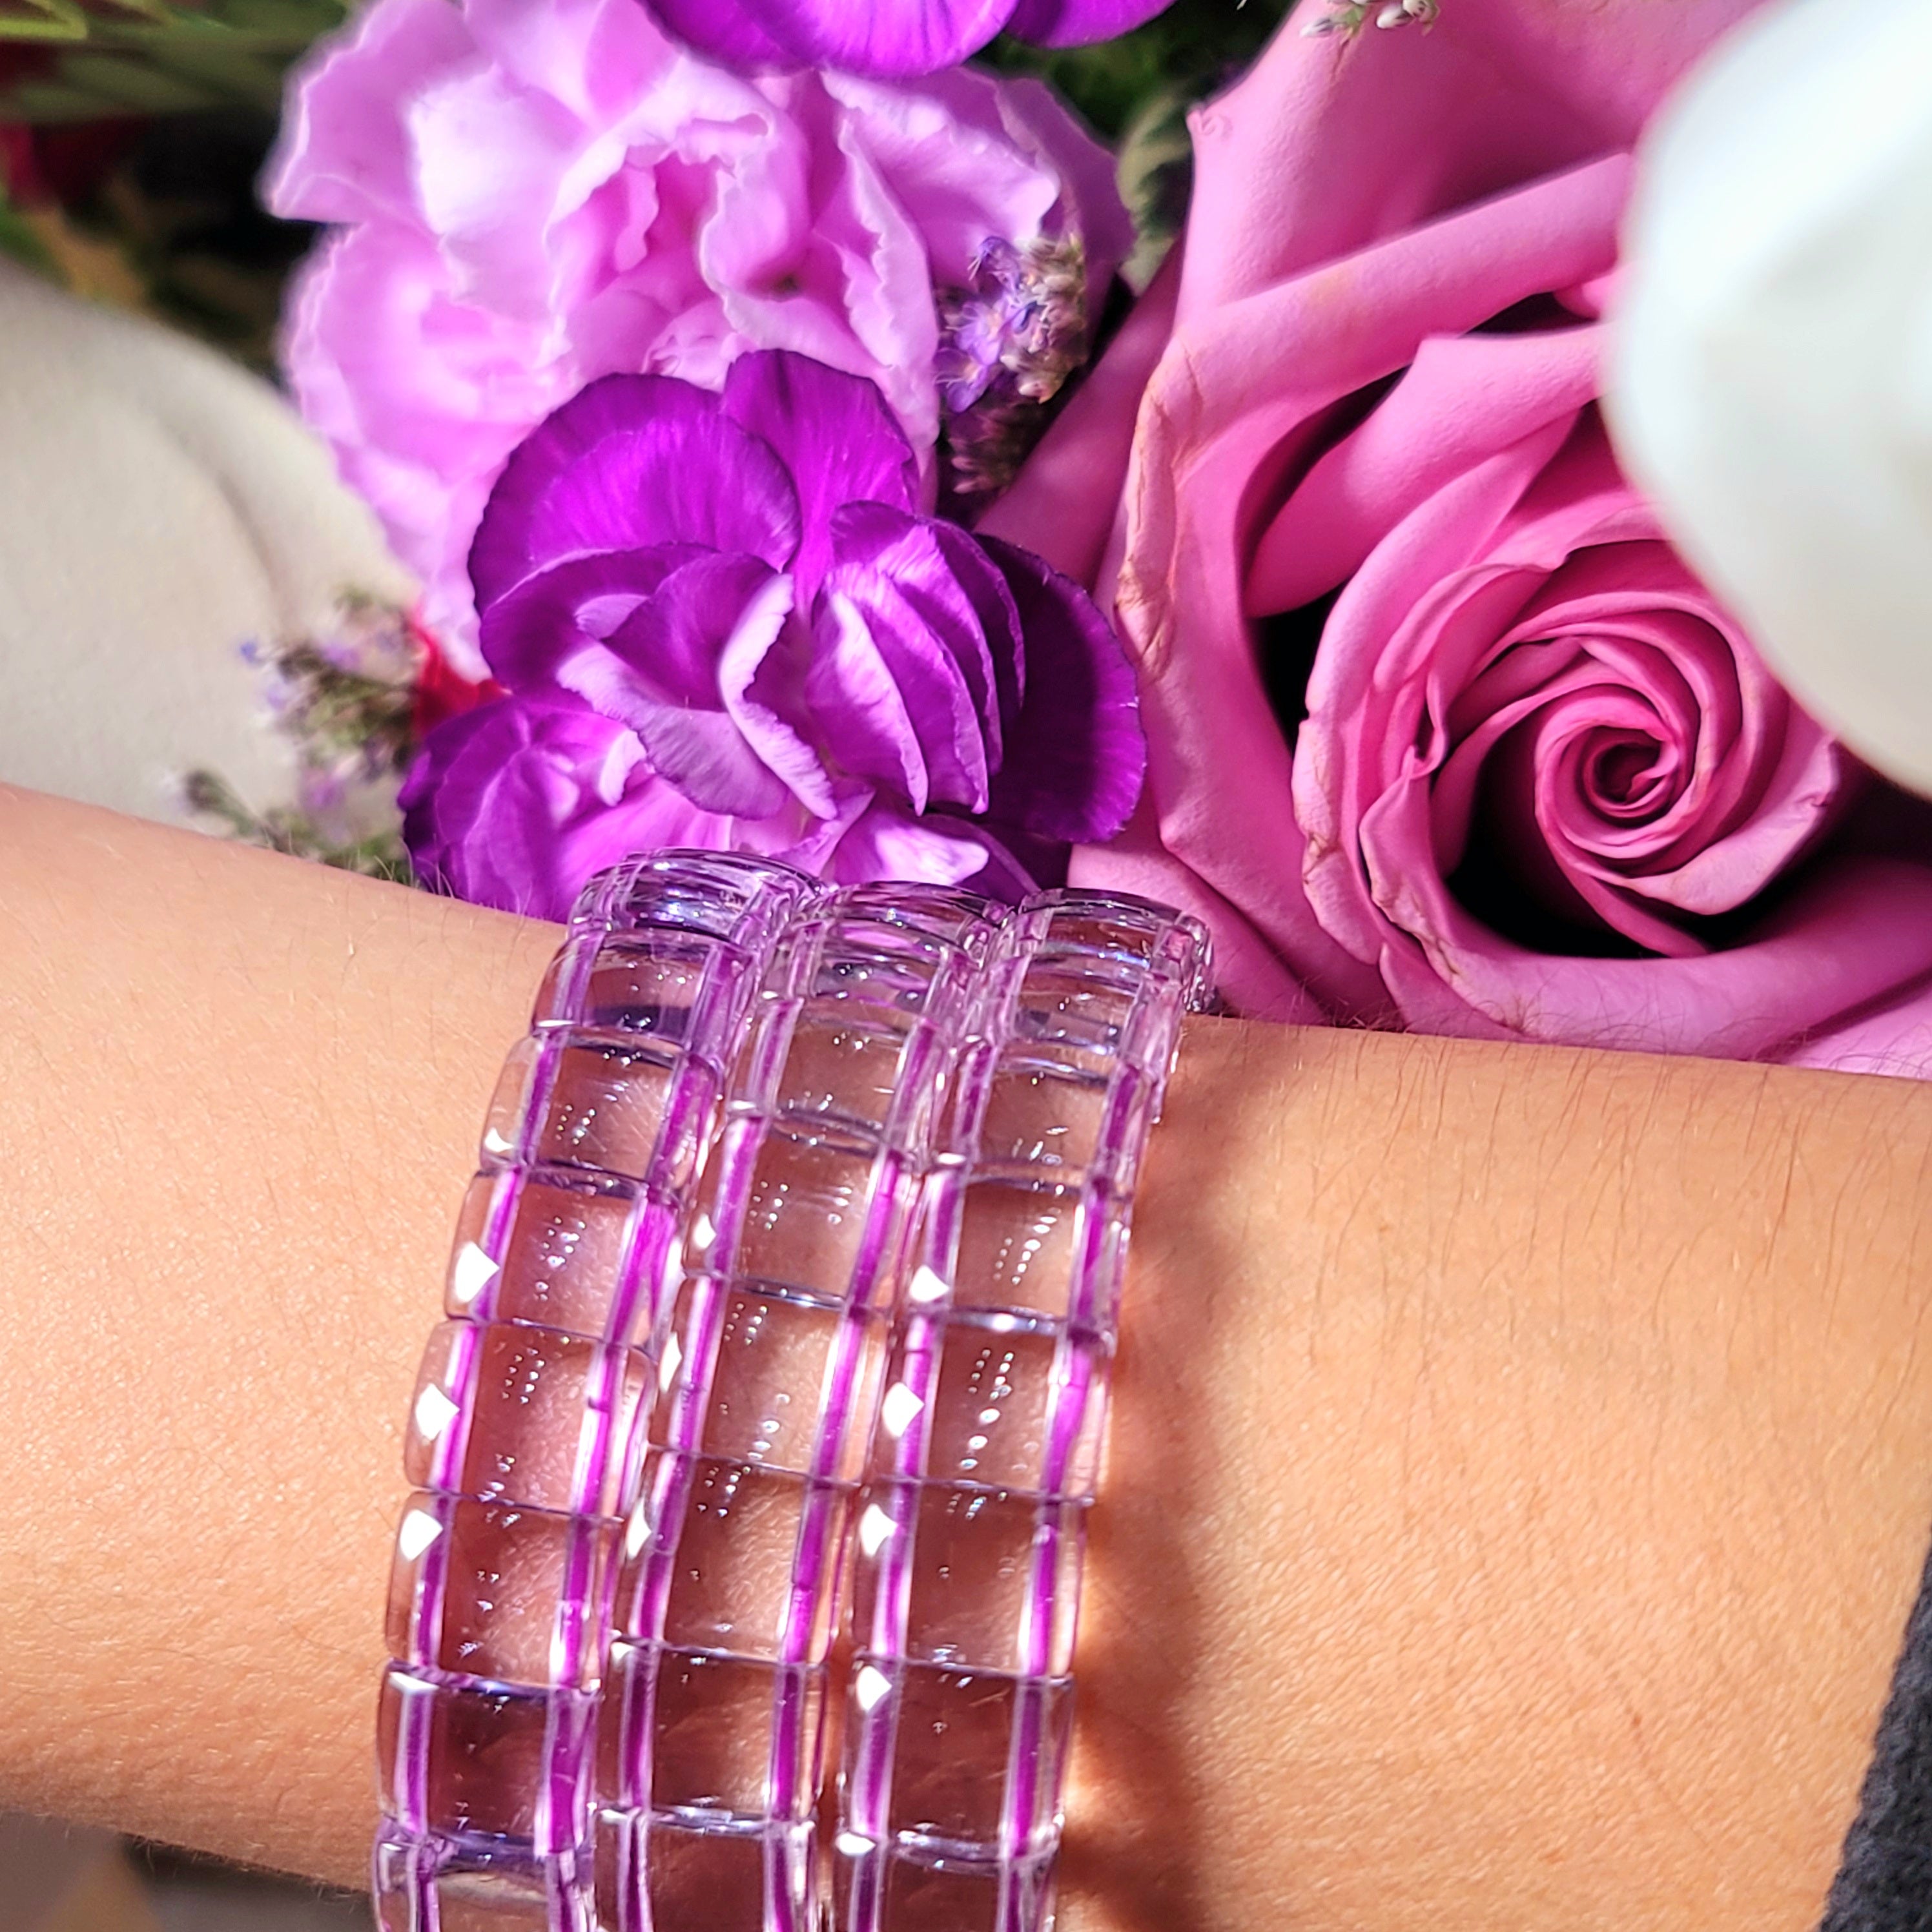 Bolivian Amethyst Stretchy Bangle Bracelet for Intuition and Protection